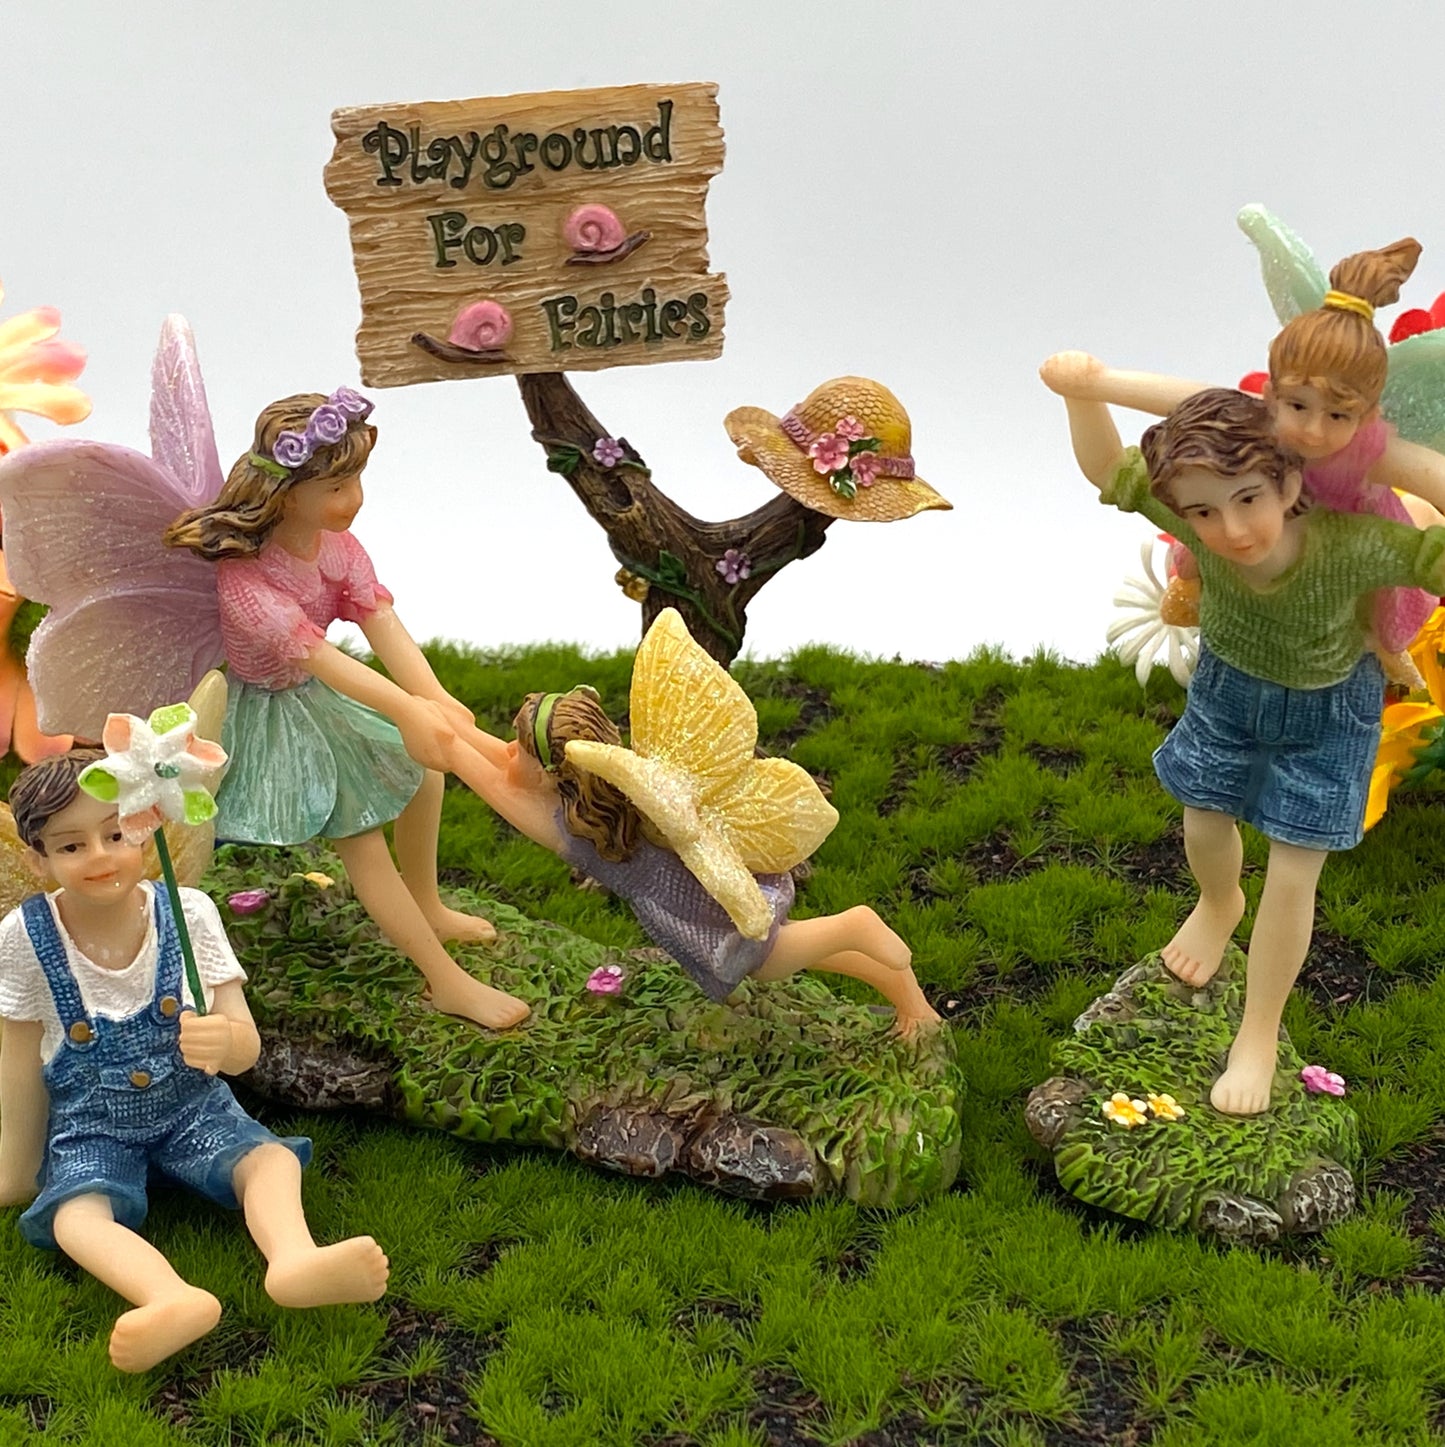 A group of five miniature fairies playing together.